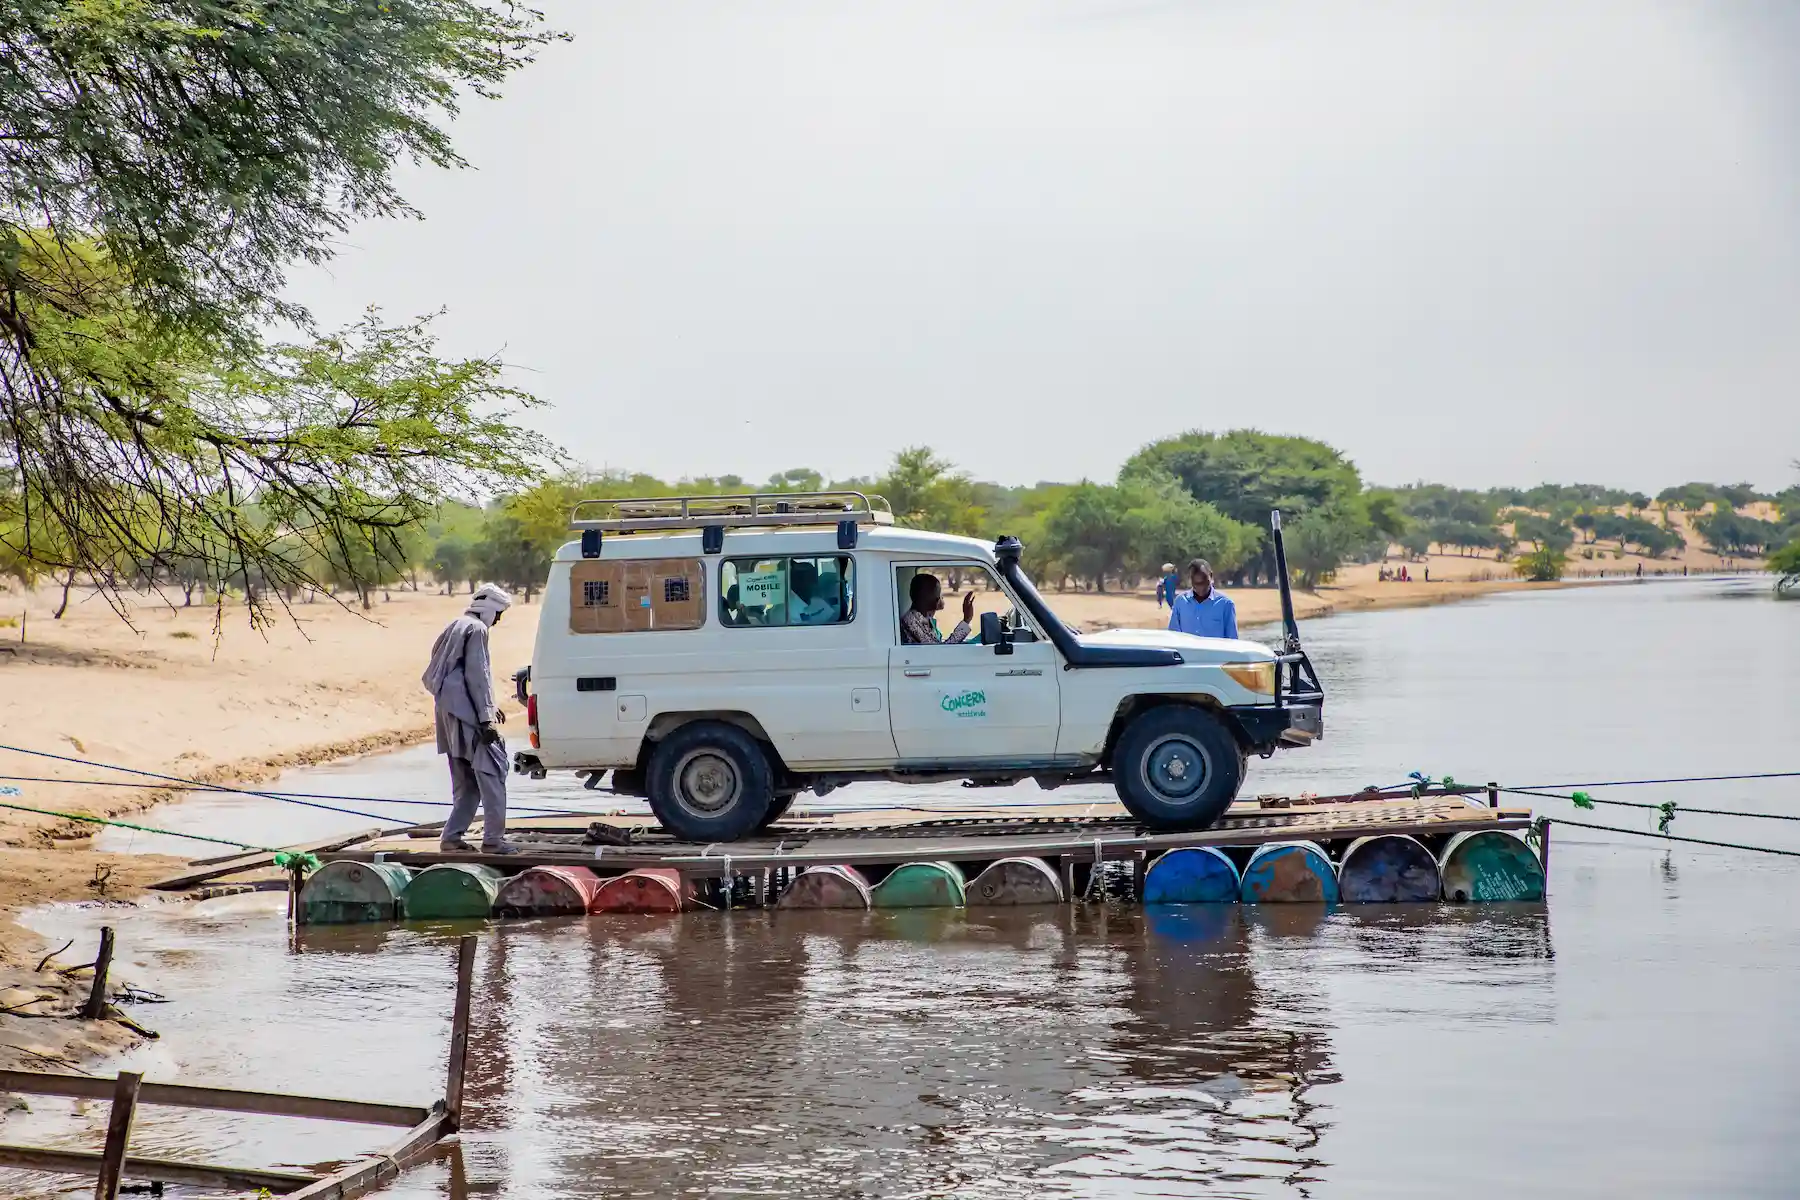 A Concern Worldwide vehicle on a raft in Chad